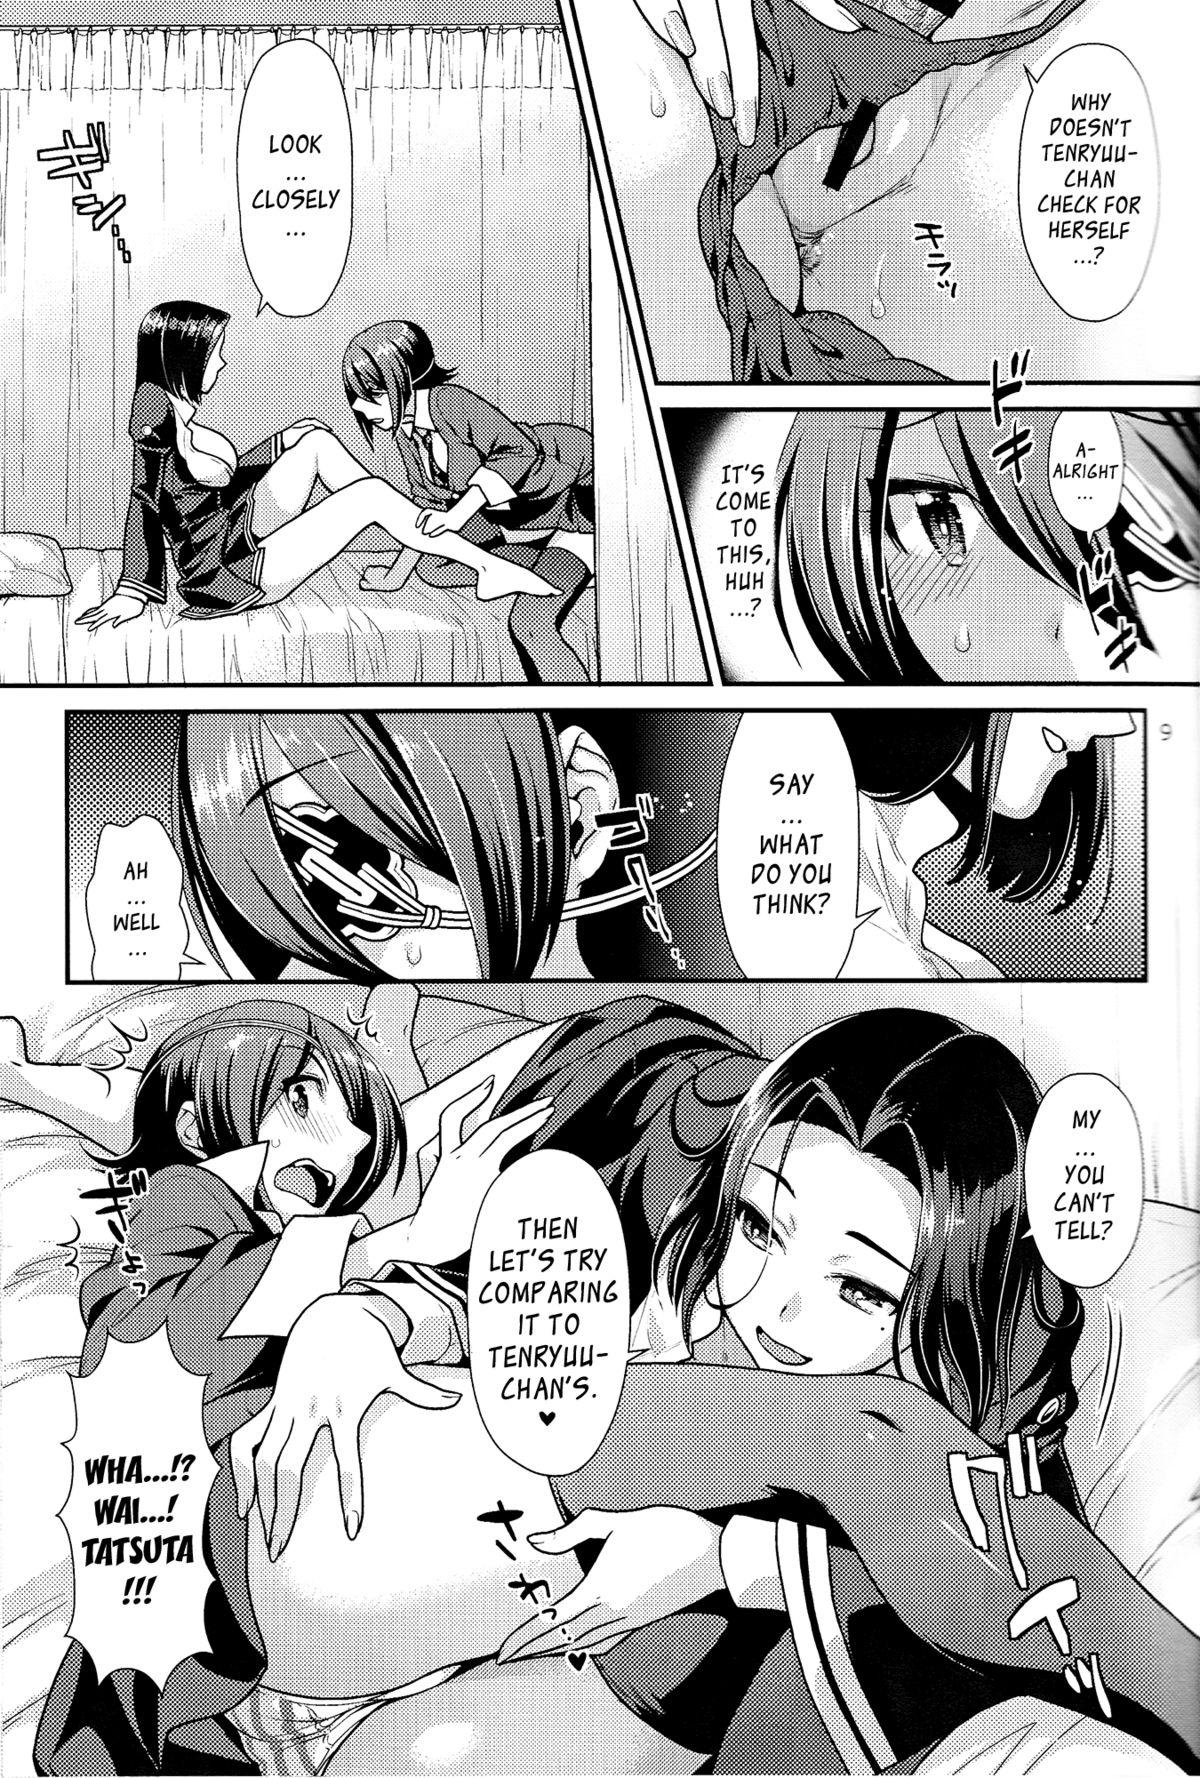 Home Kuroyuri no Hanakotoba | Black Lily in the Language of the Flowers - Kantai collection Best Blow Jobs Ever - Page 8